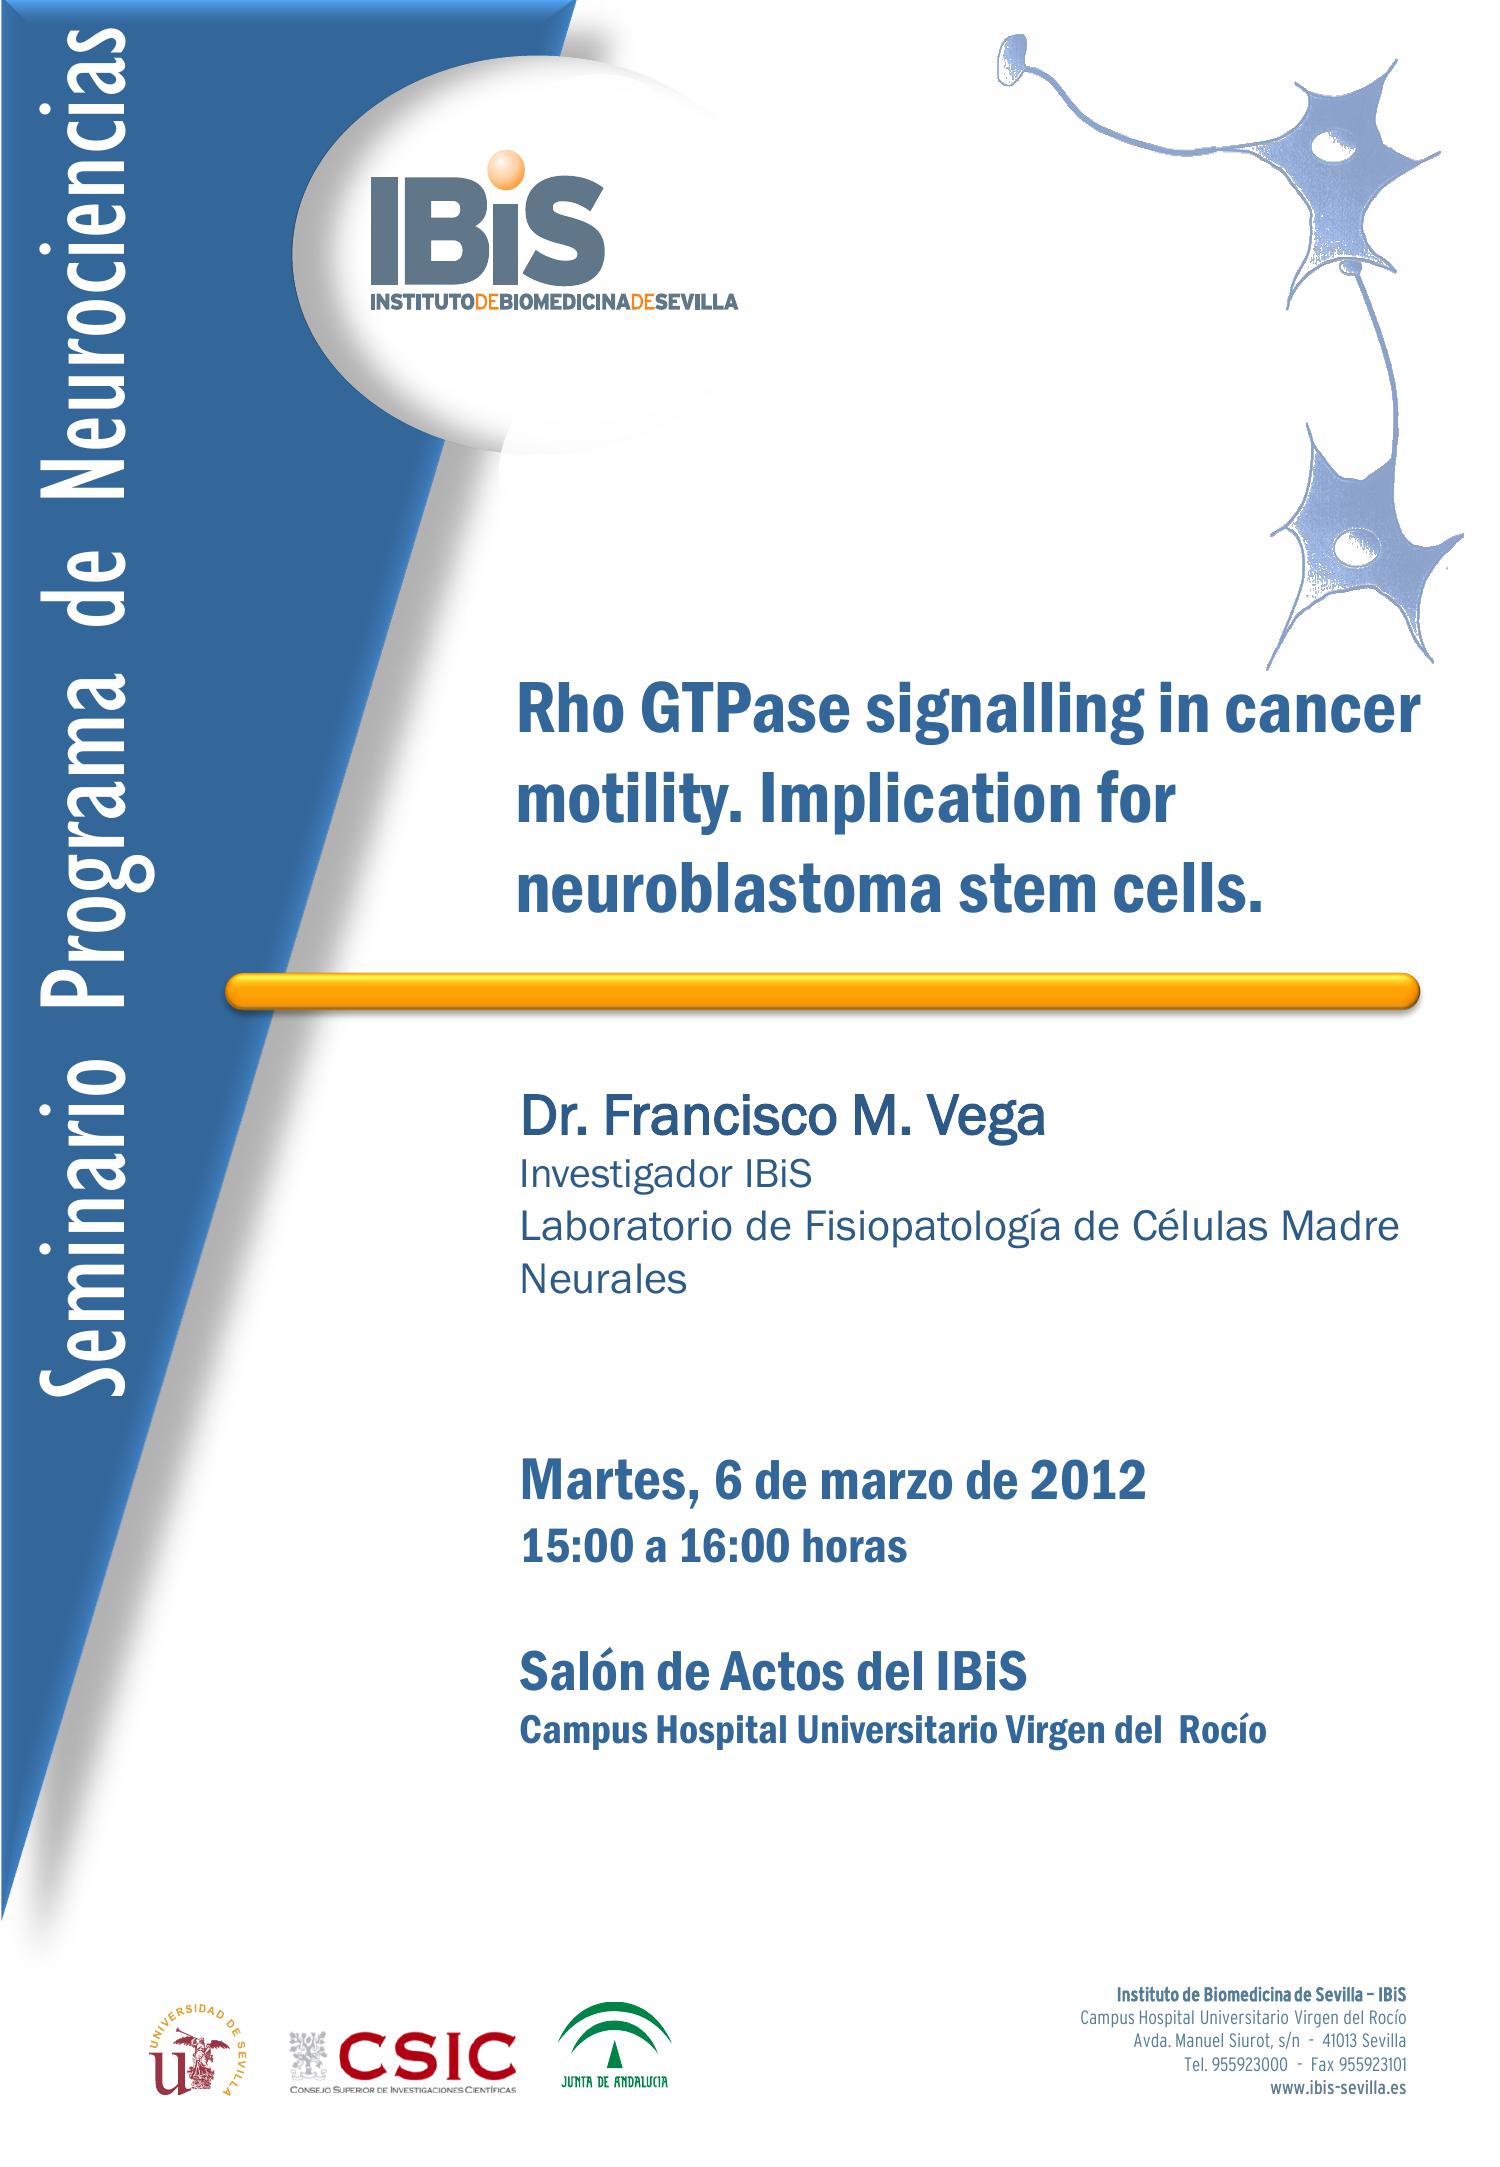 Poster: Rho GTPase signalling in cancer motility. Implication for neuroblastoma stem cells.